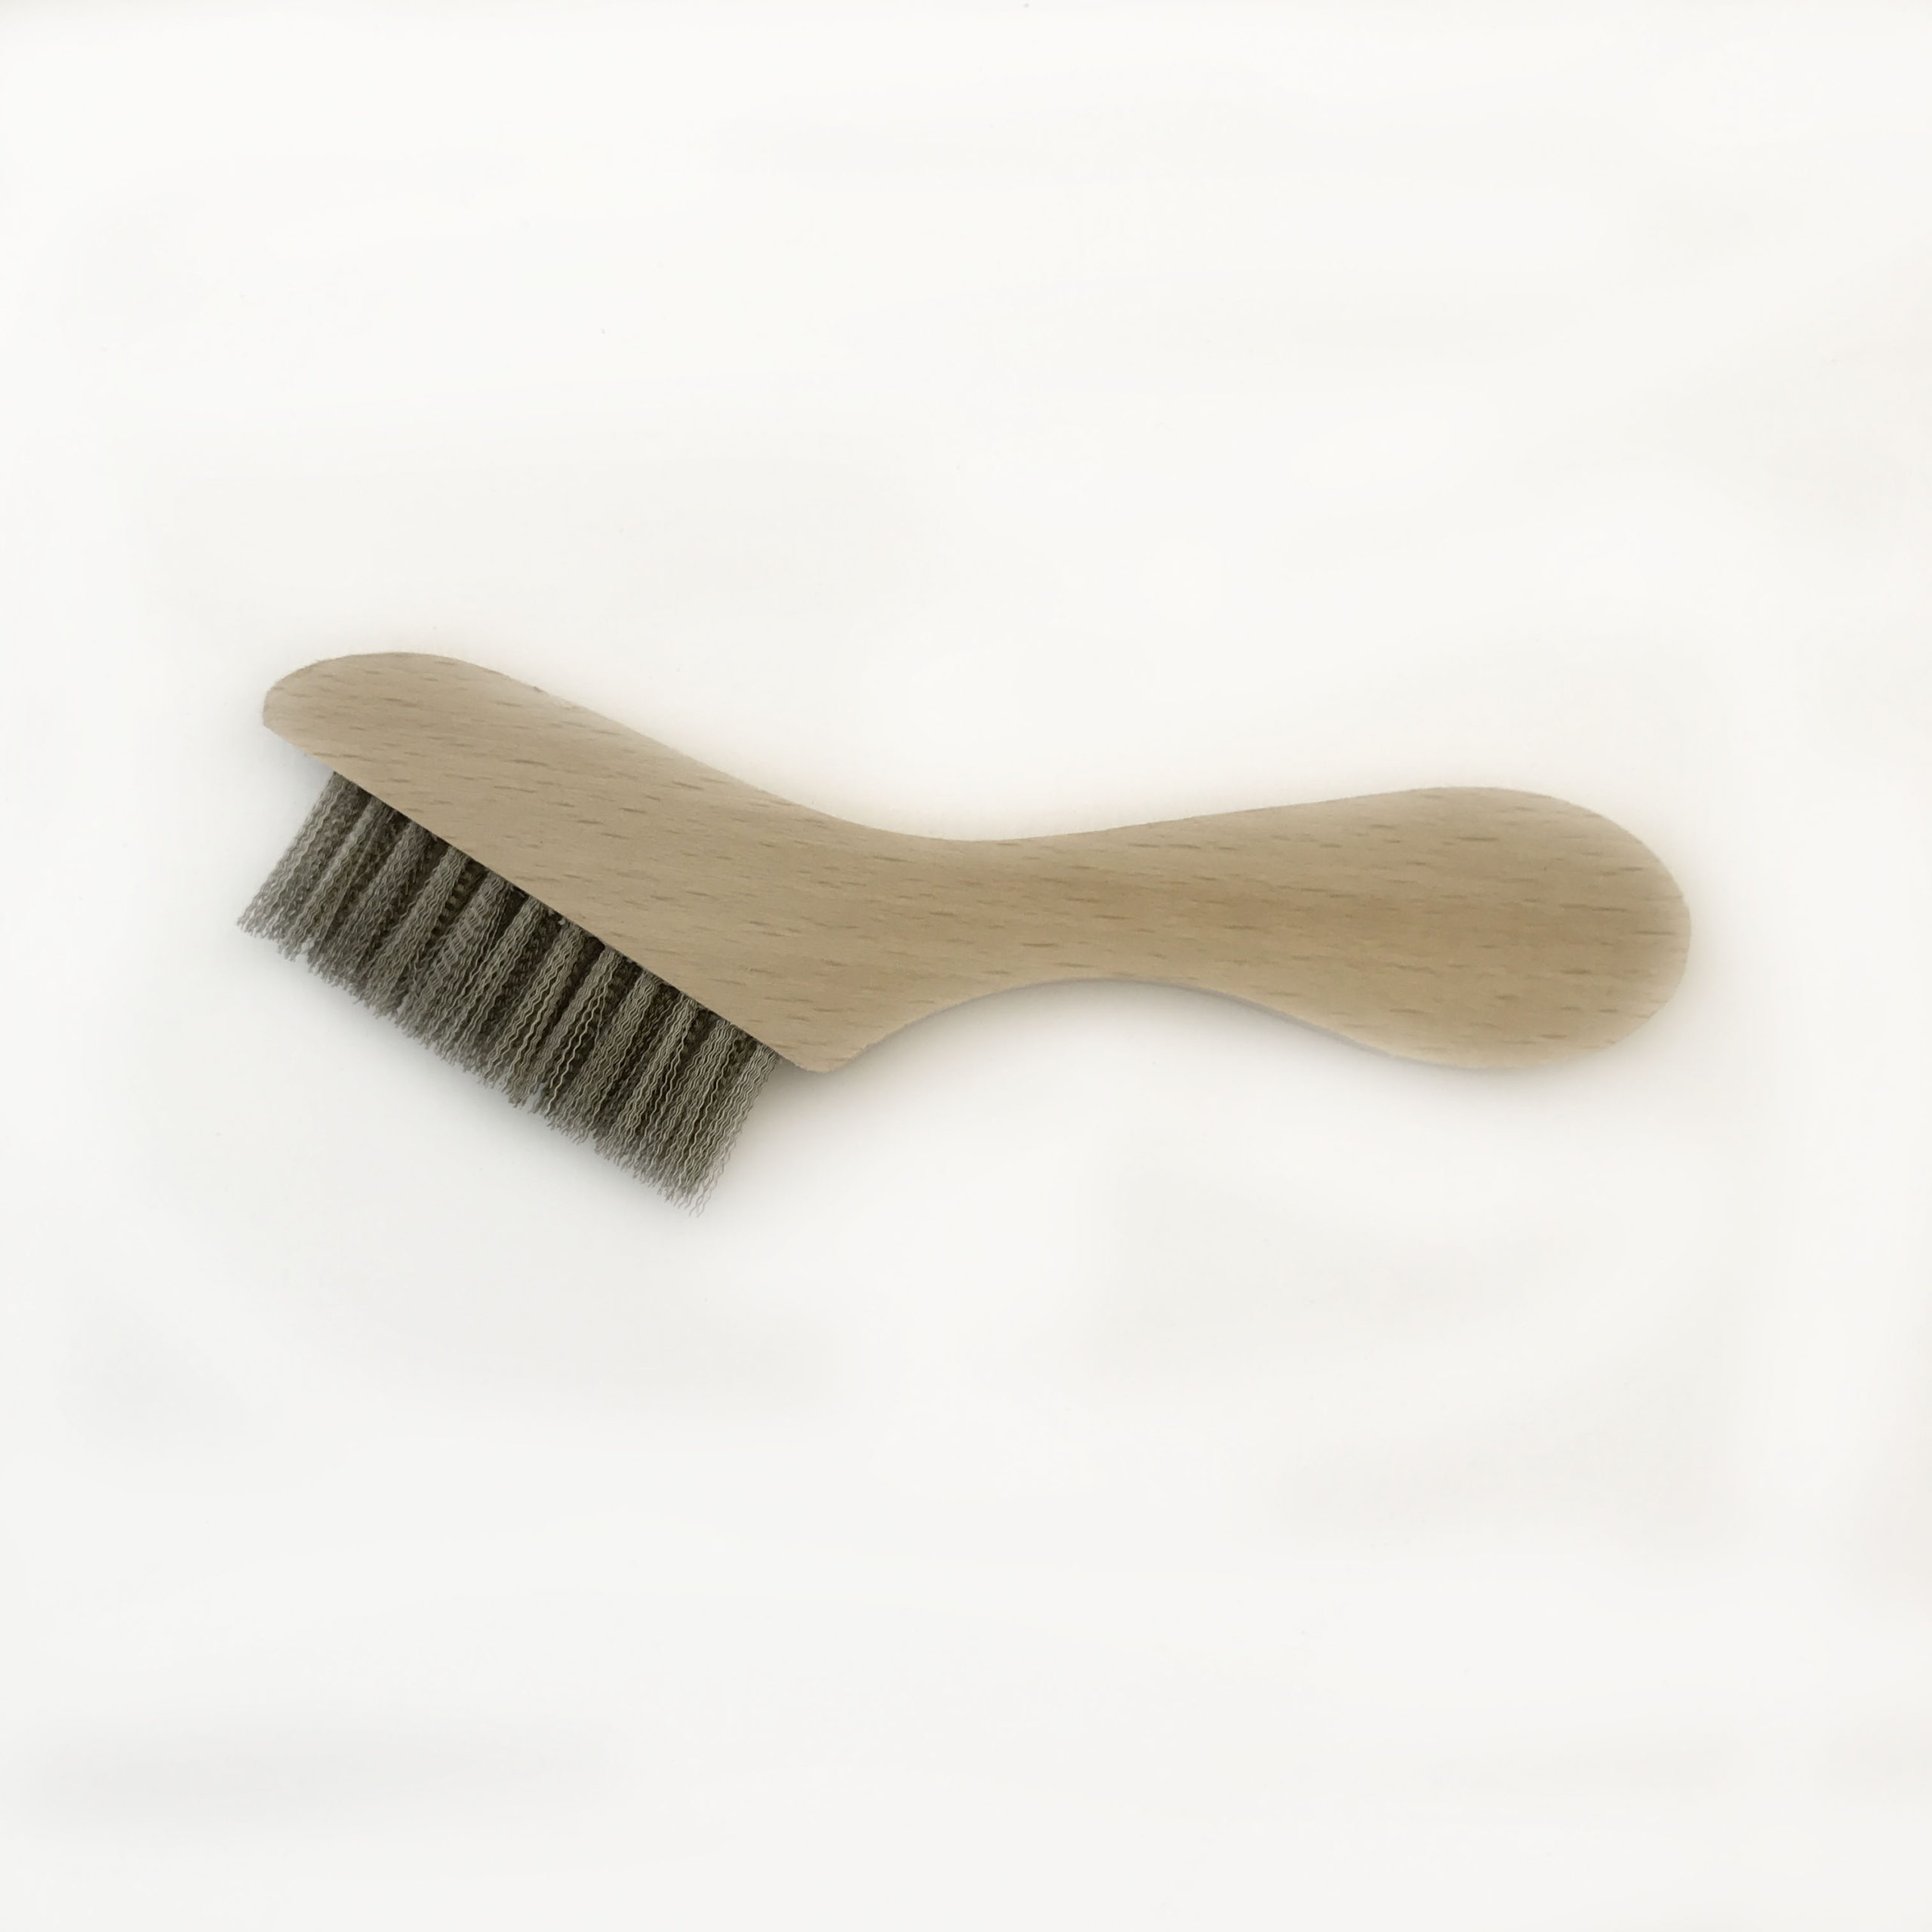 Small s/s Wire Brush